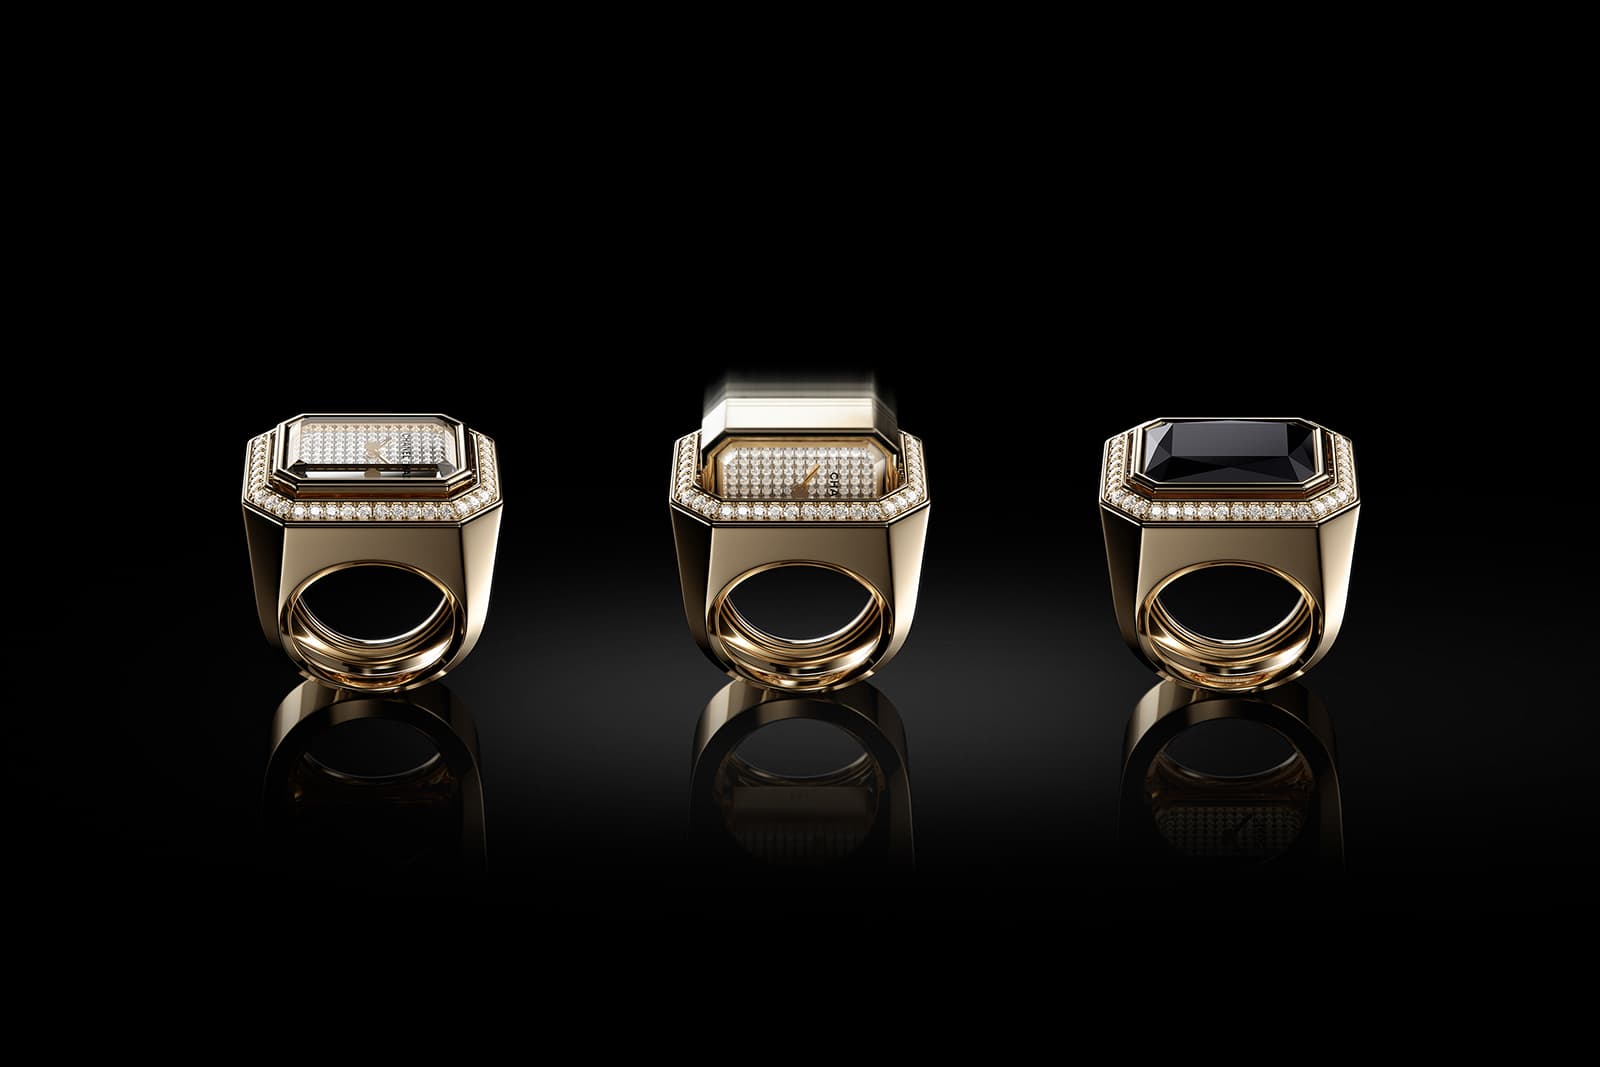 Chanel 'Premiere' collection 'Midnight in Vendome' watch ring with onyx and 1.06ct diamonds in 18k yellow gold